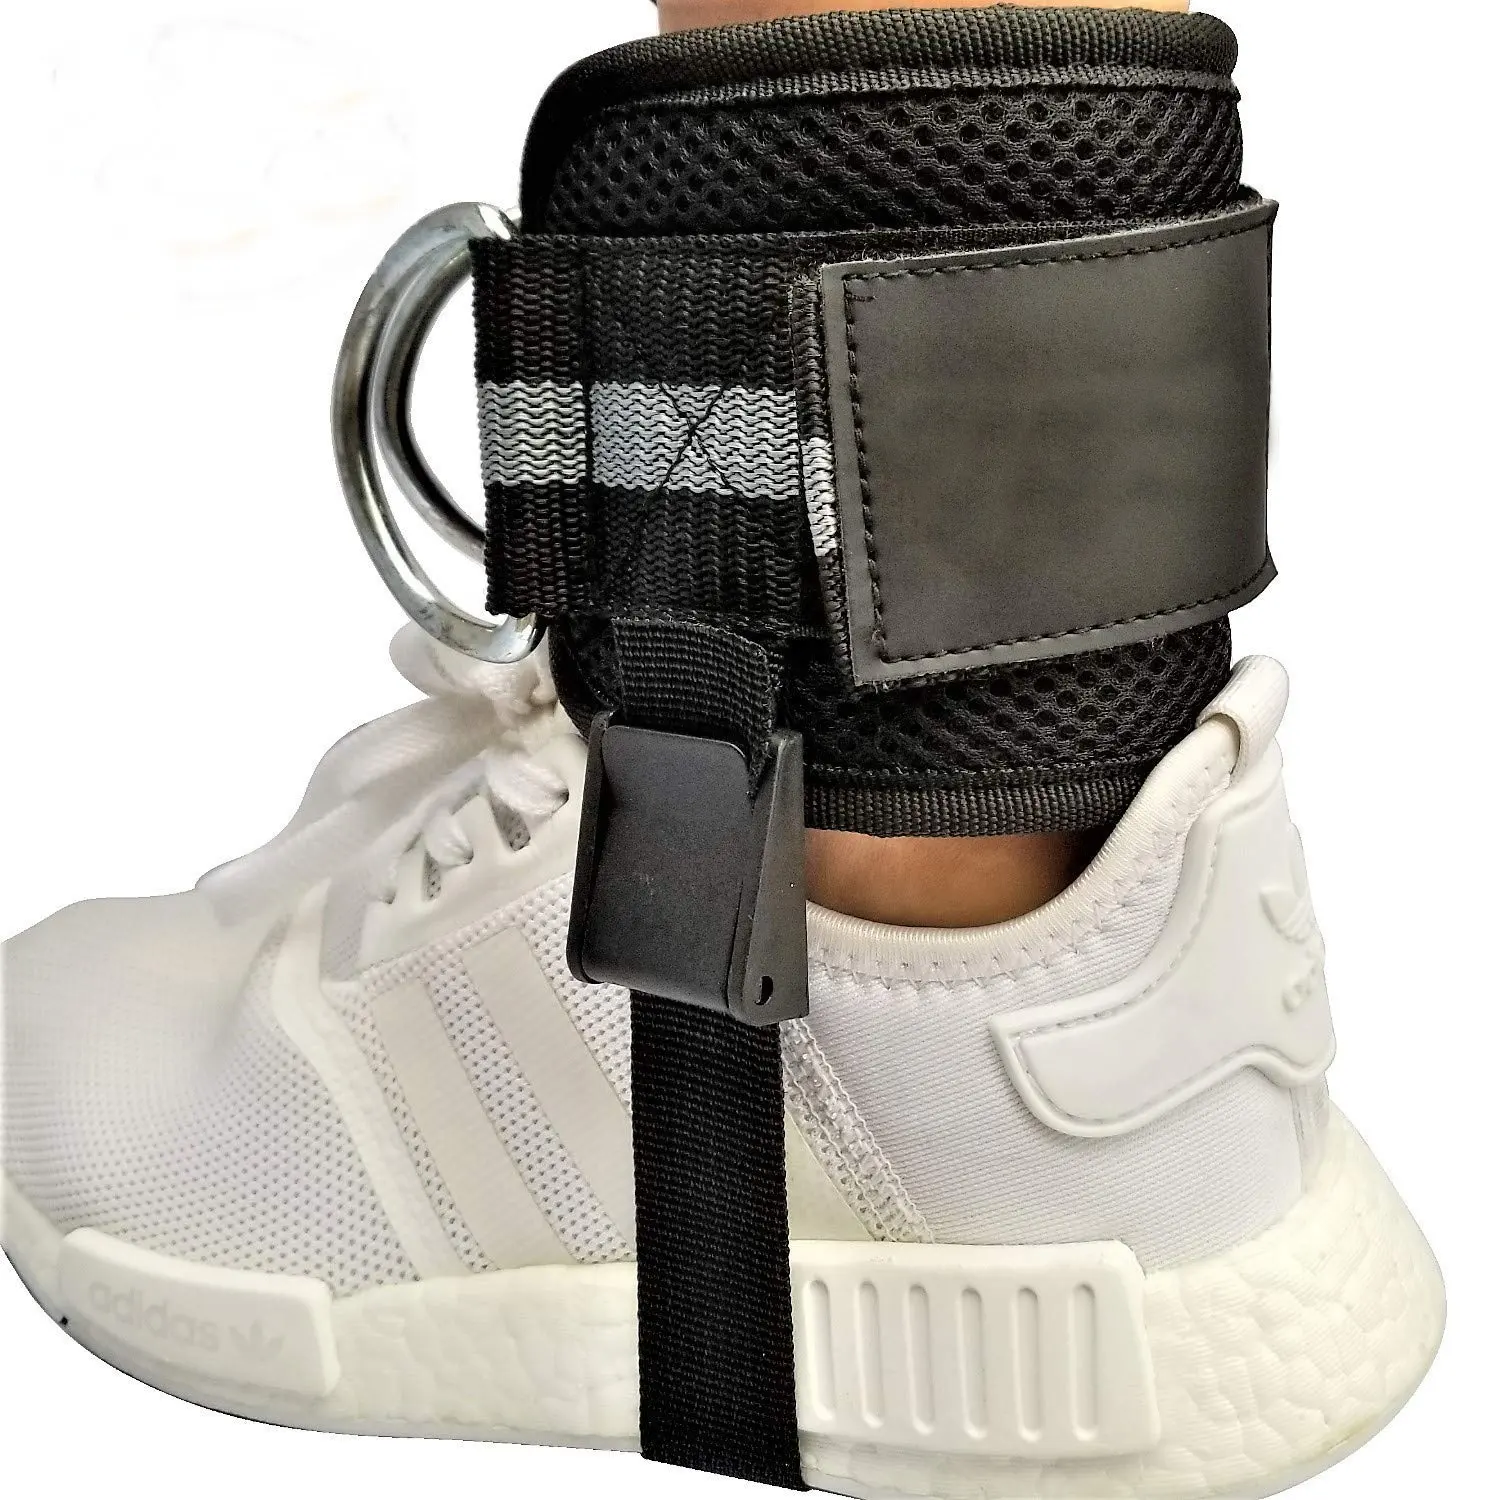 Custom Ankle Neoprene Straps For Cable Machine Ankle Protector Fitness Adjustable Neoprene Padded Ankle Strap For Cable Machines